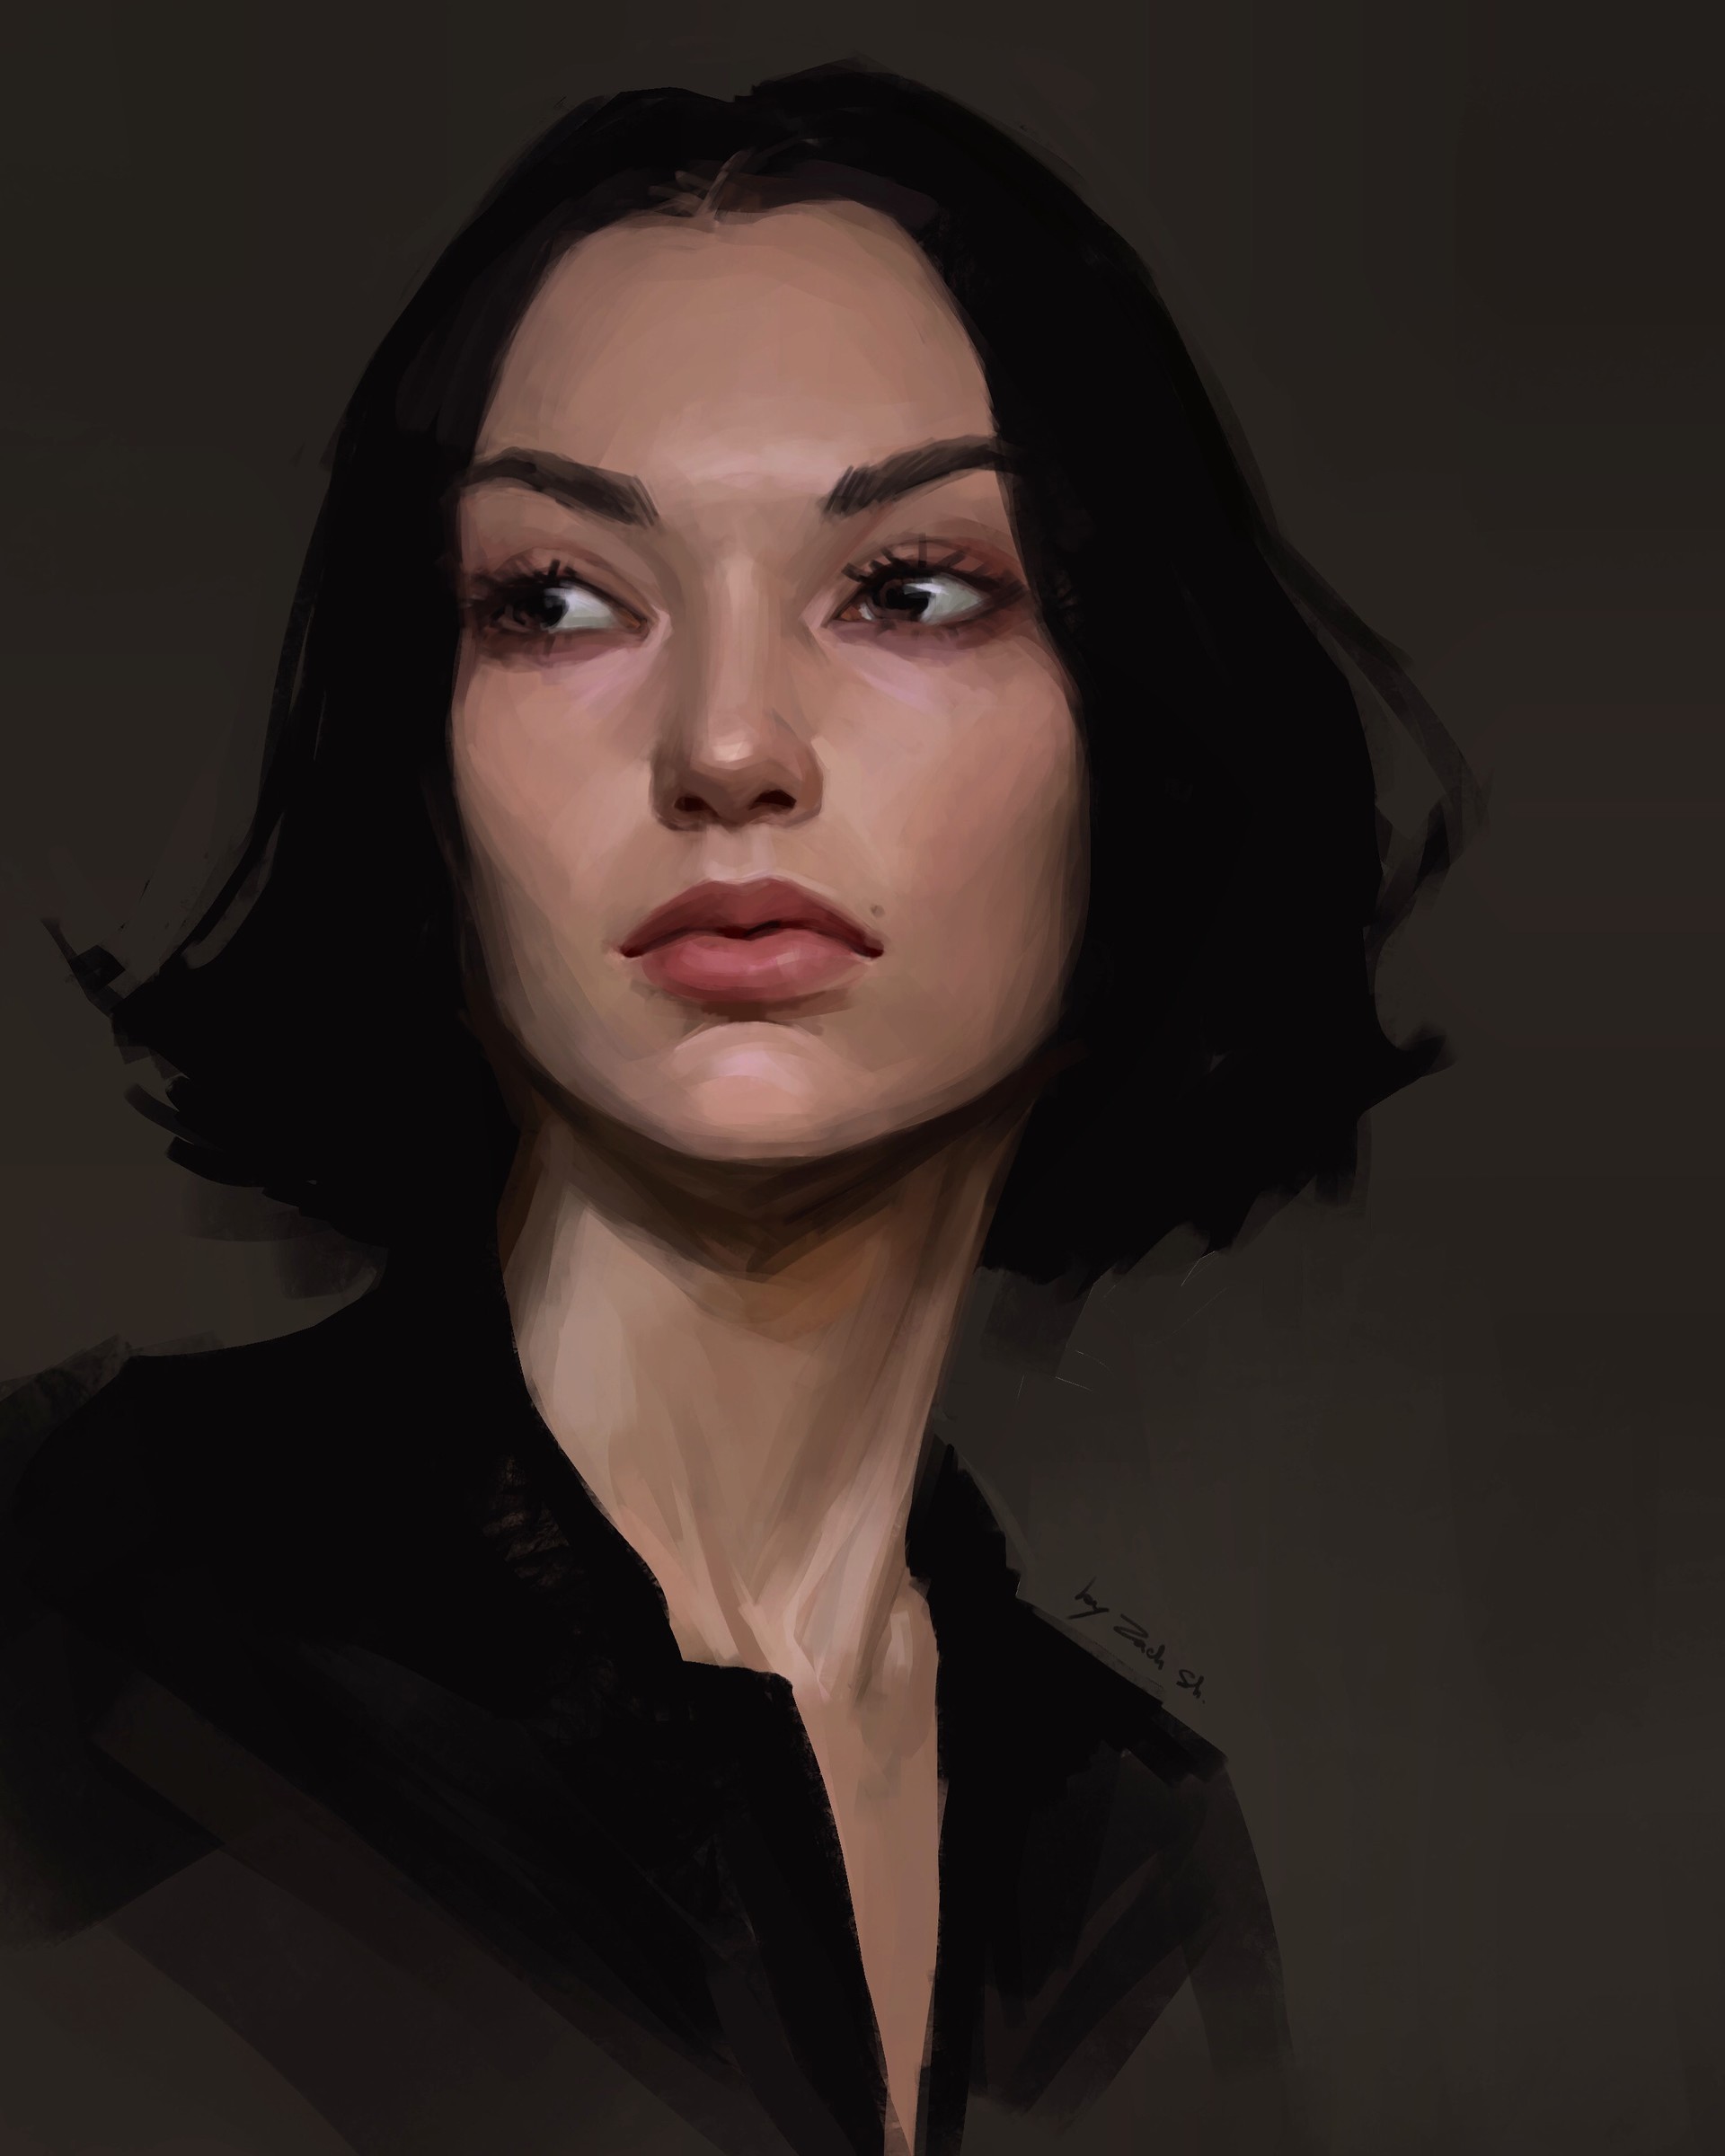 ArtStation - quick study from photo